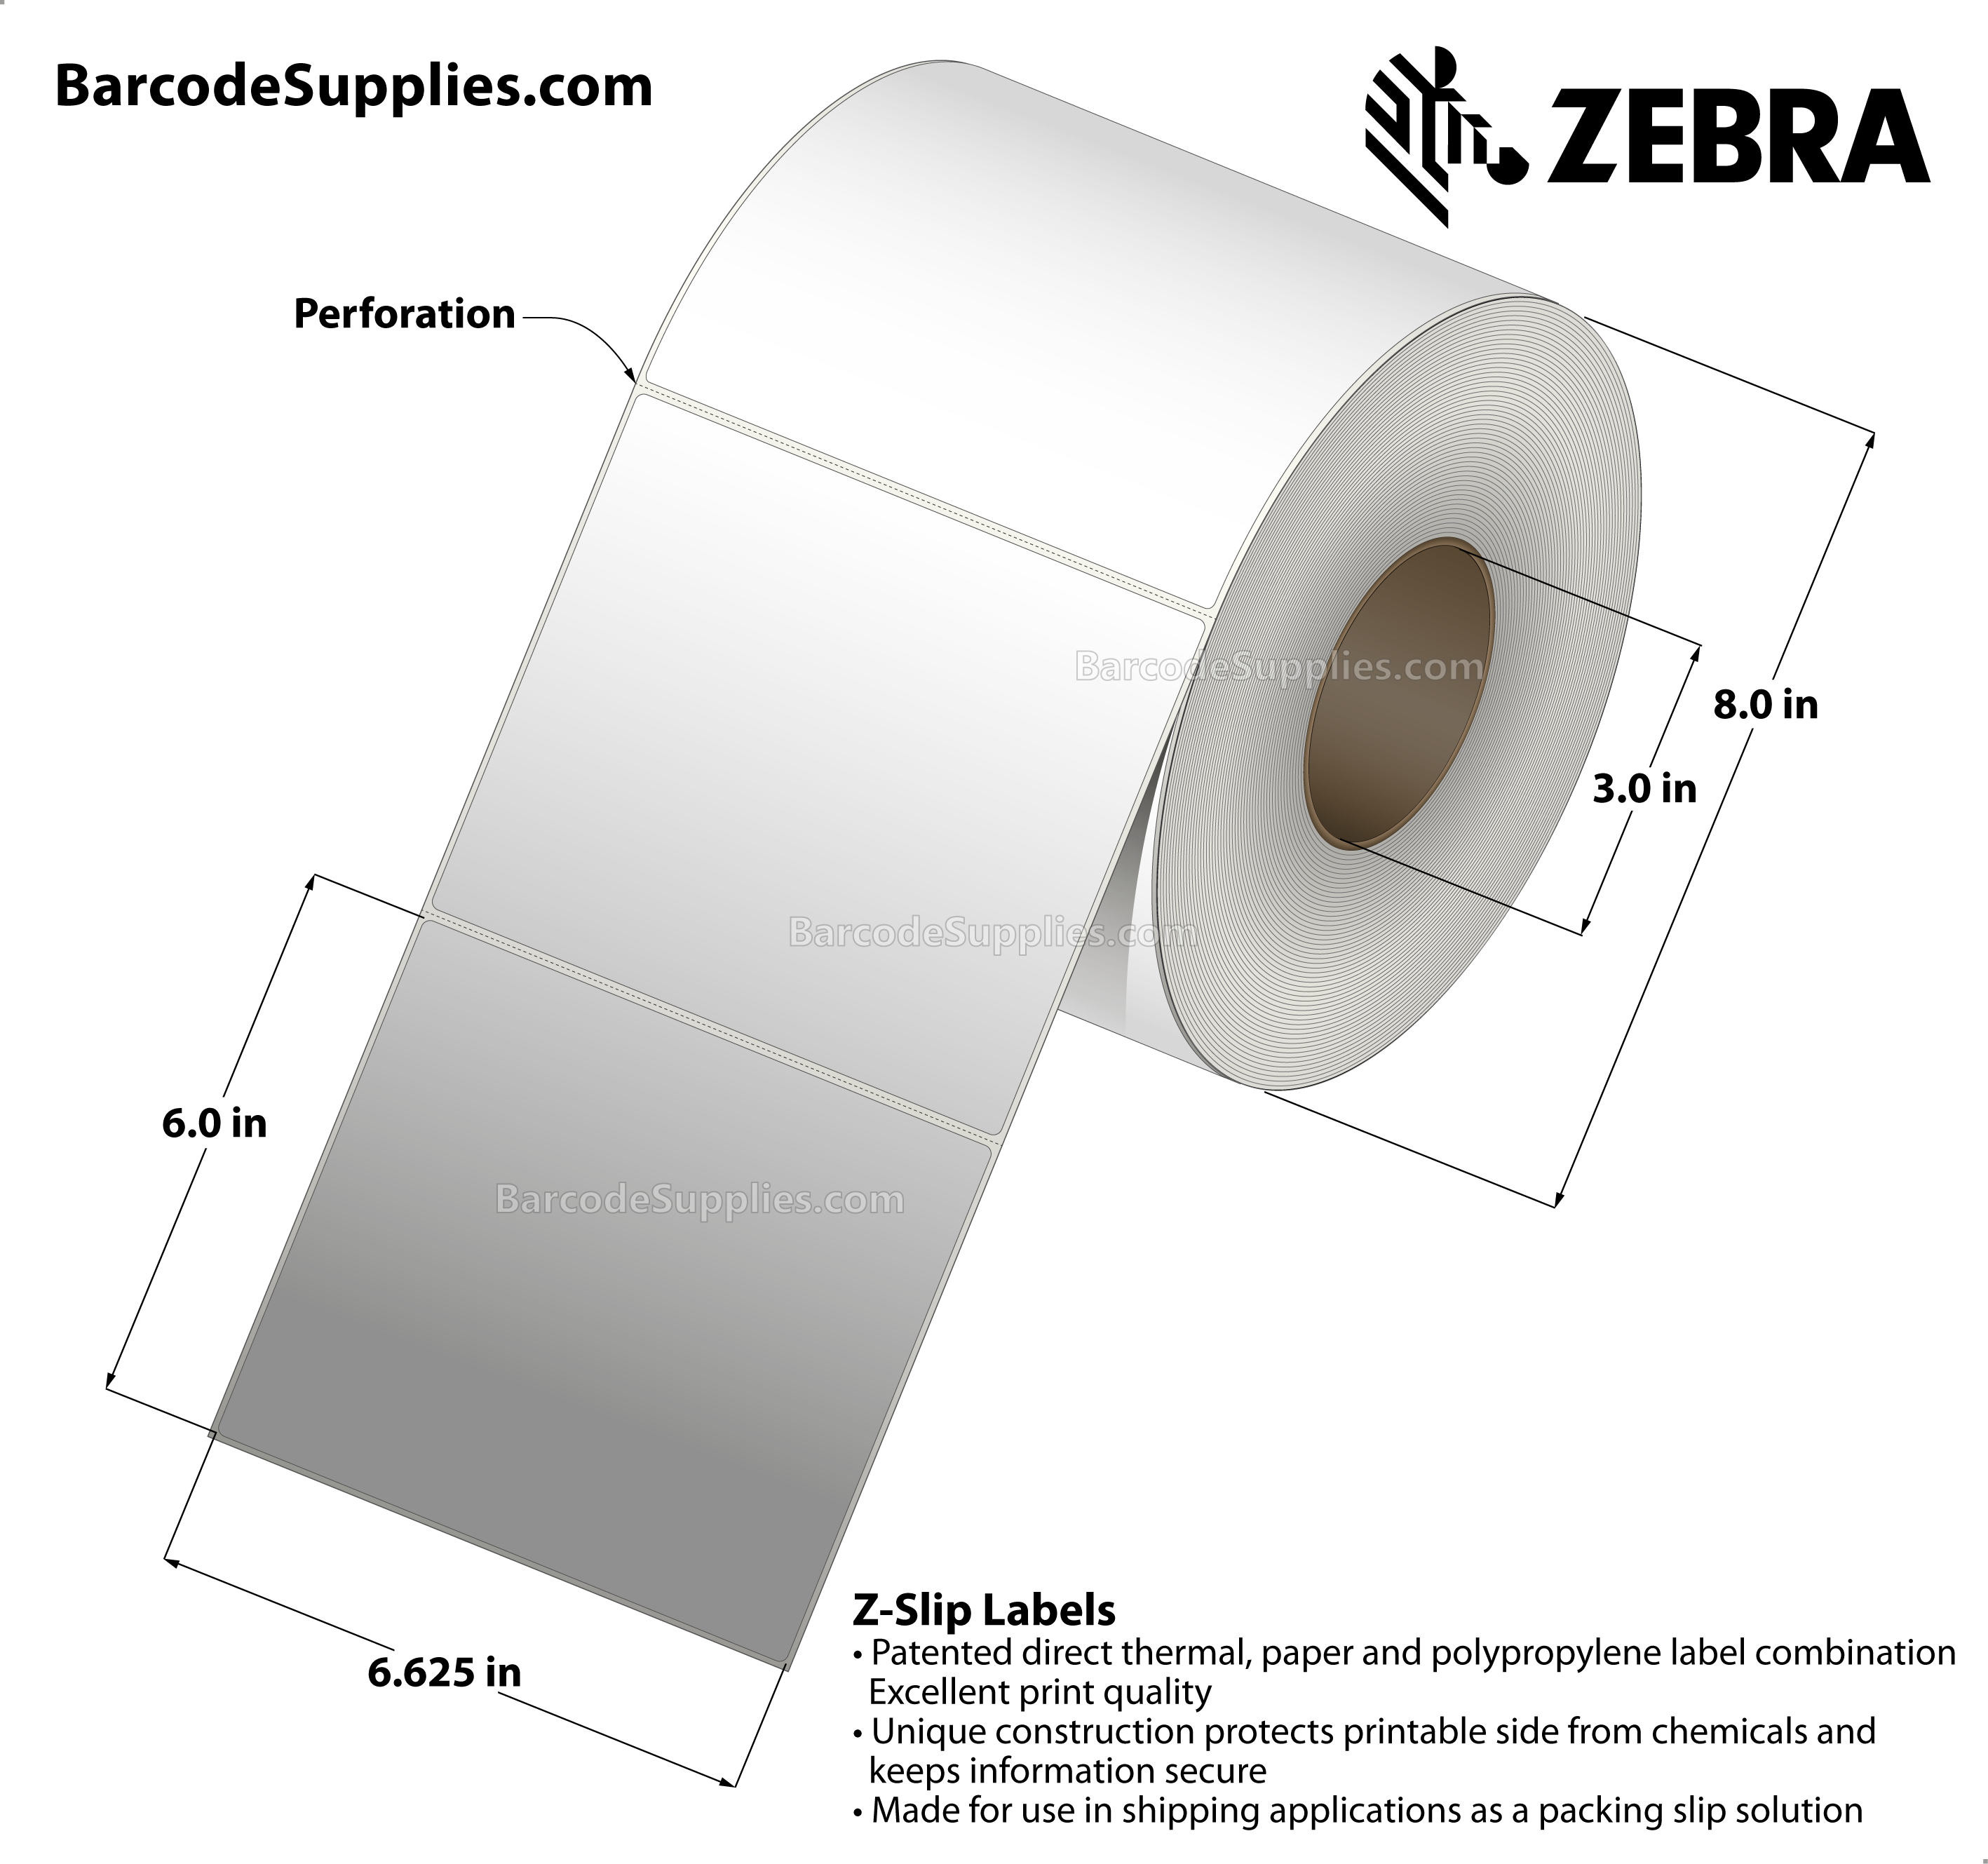 6.625 x 6 Direct Thermal White Z-Slip Labels With Permanent Adhesive - All-in-one packing slip solution - Perforated - 660 Labels Per Roll - Carton Of 2 Rolls - 1320 Labels Total - MPN: 10004425